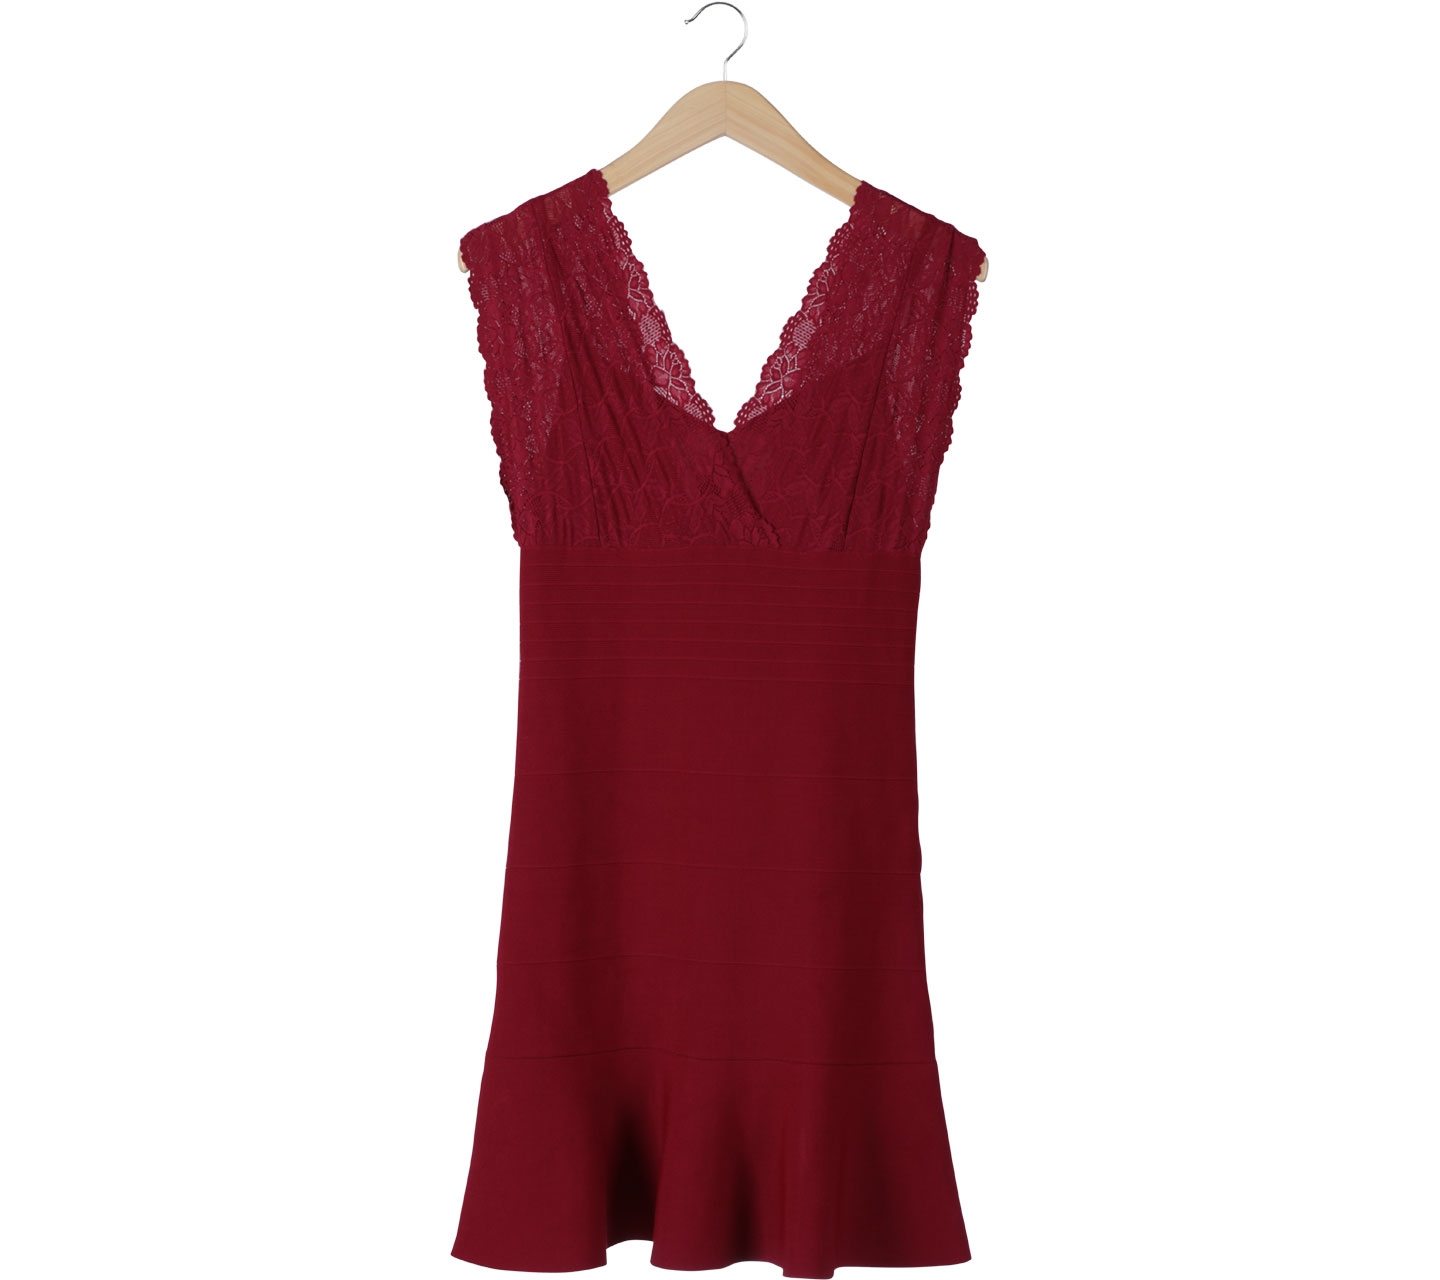 Guess Red Bodycon Lace Mini Dress